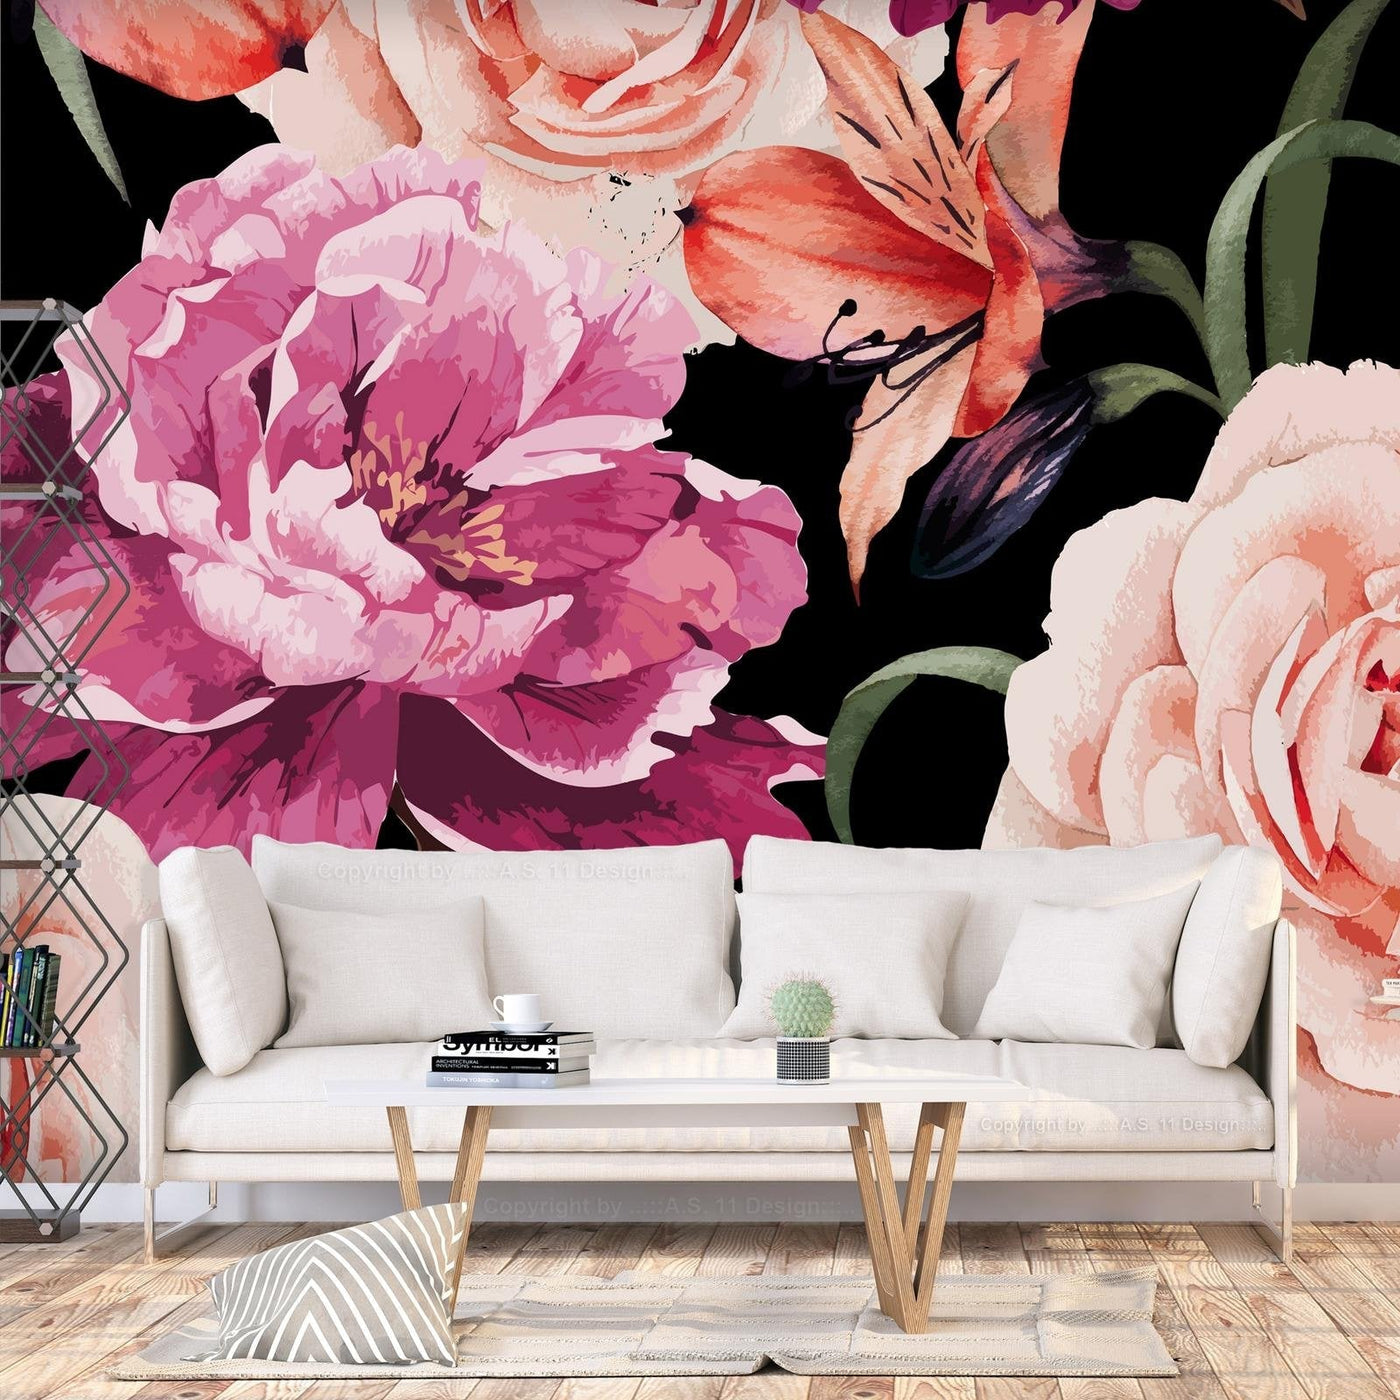 Peel and stick wall mural - Roses of Love-TipTopHomeDecor